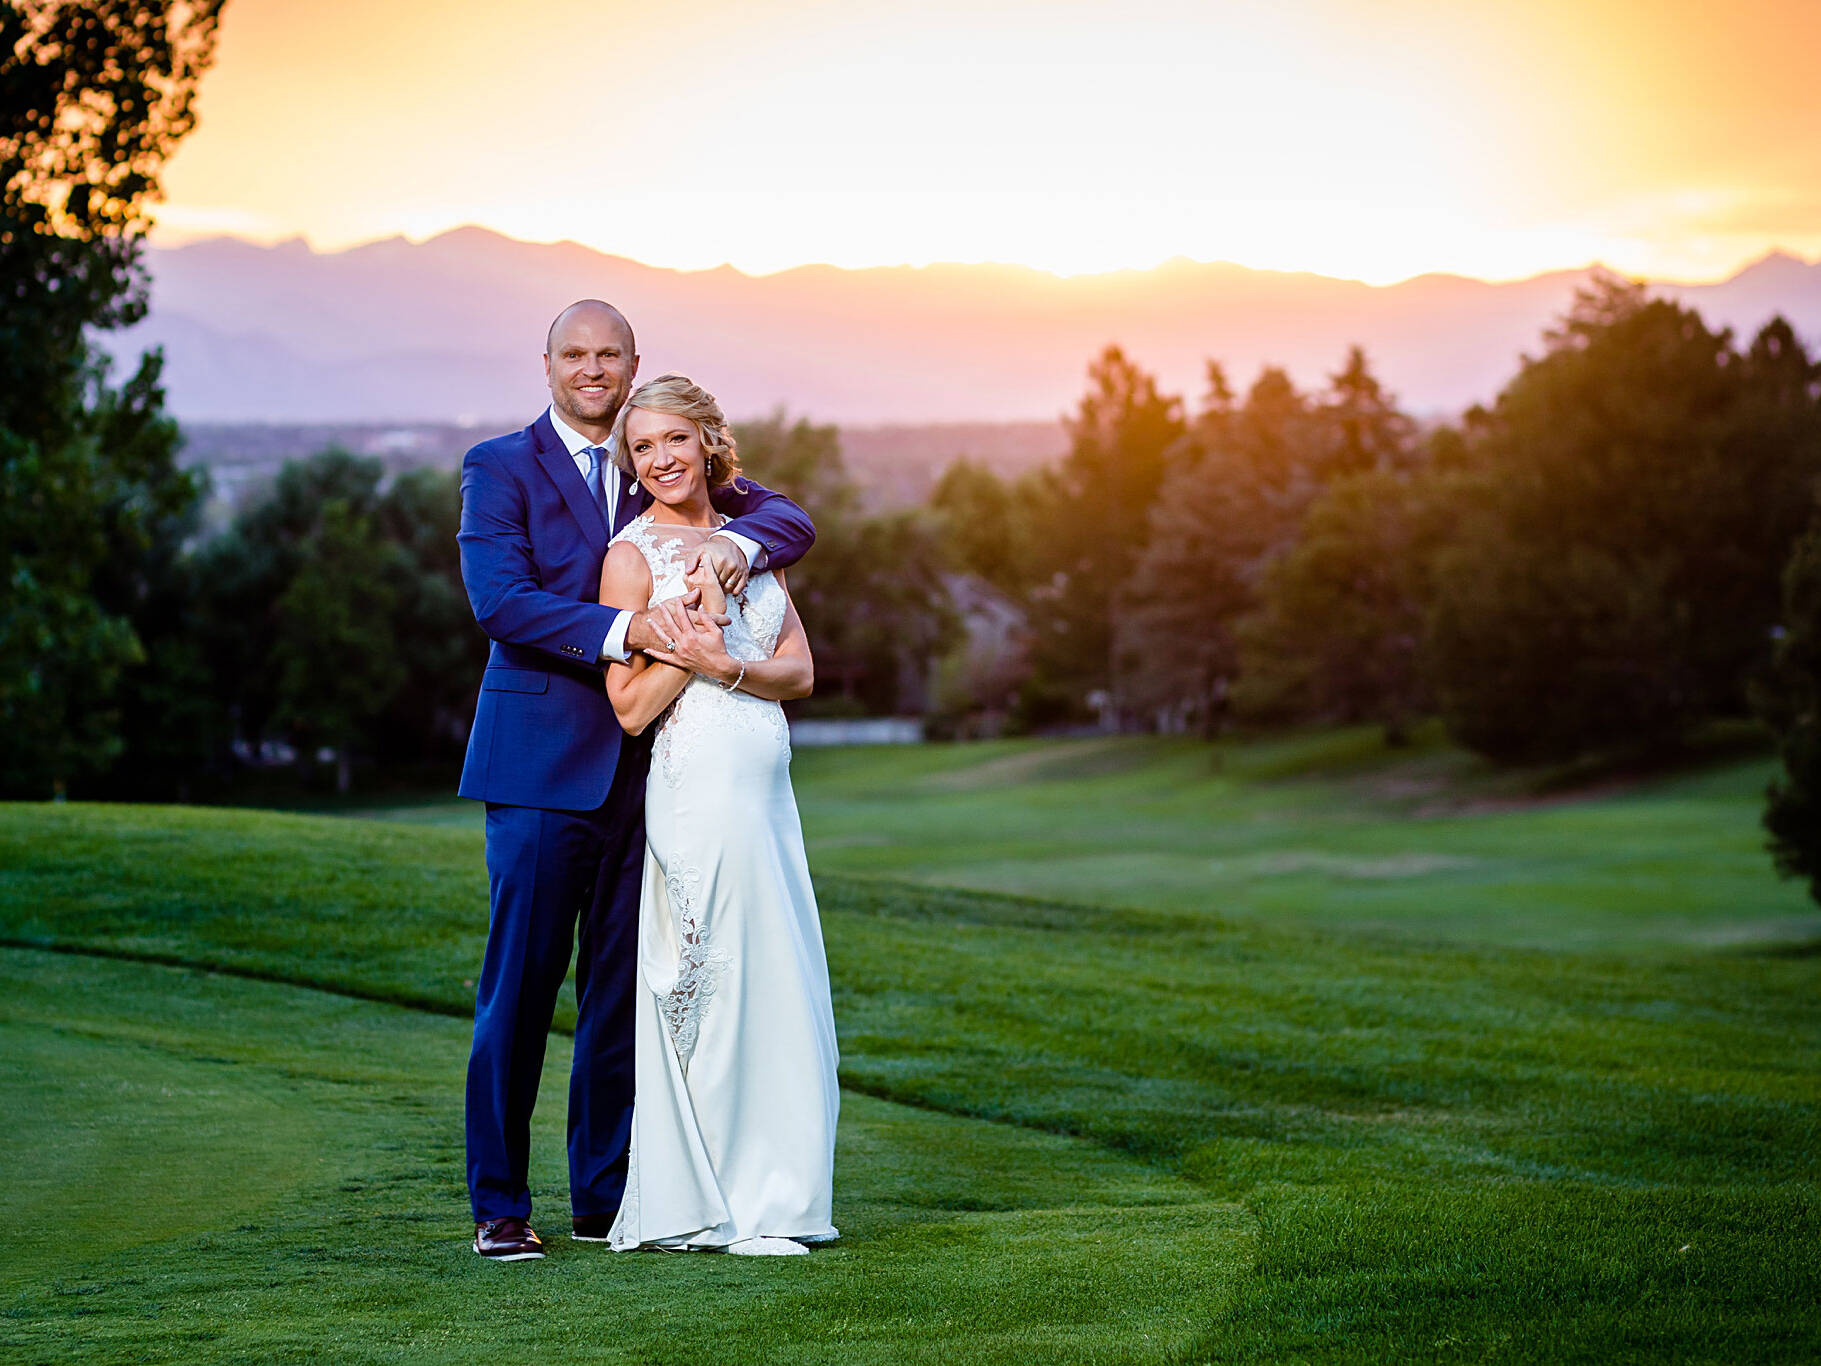 Beautiful Sunset Portraits with Bride and Groom. Kelli & Jason's golf course wedding at The Ranch Country Club by Colorado Wedding Photographer Jennifer Garza, Small wedding ideas, Intimate wedding, Golf Course Wedding, Country Club Wedding, Summer Wedding, Golf Wedding, Wedding planning, Colorado Wedding Photographer, Colorado Elopement Photographer, Colorado Elopement, Colorado Wedding, Denver Wedding Photographer, Denver Wedding, Wedding Inspiration, Summer Wedding Inspiration, Covid Wedding